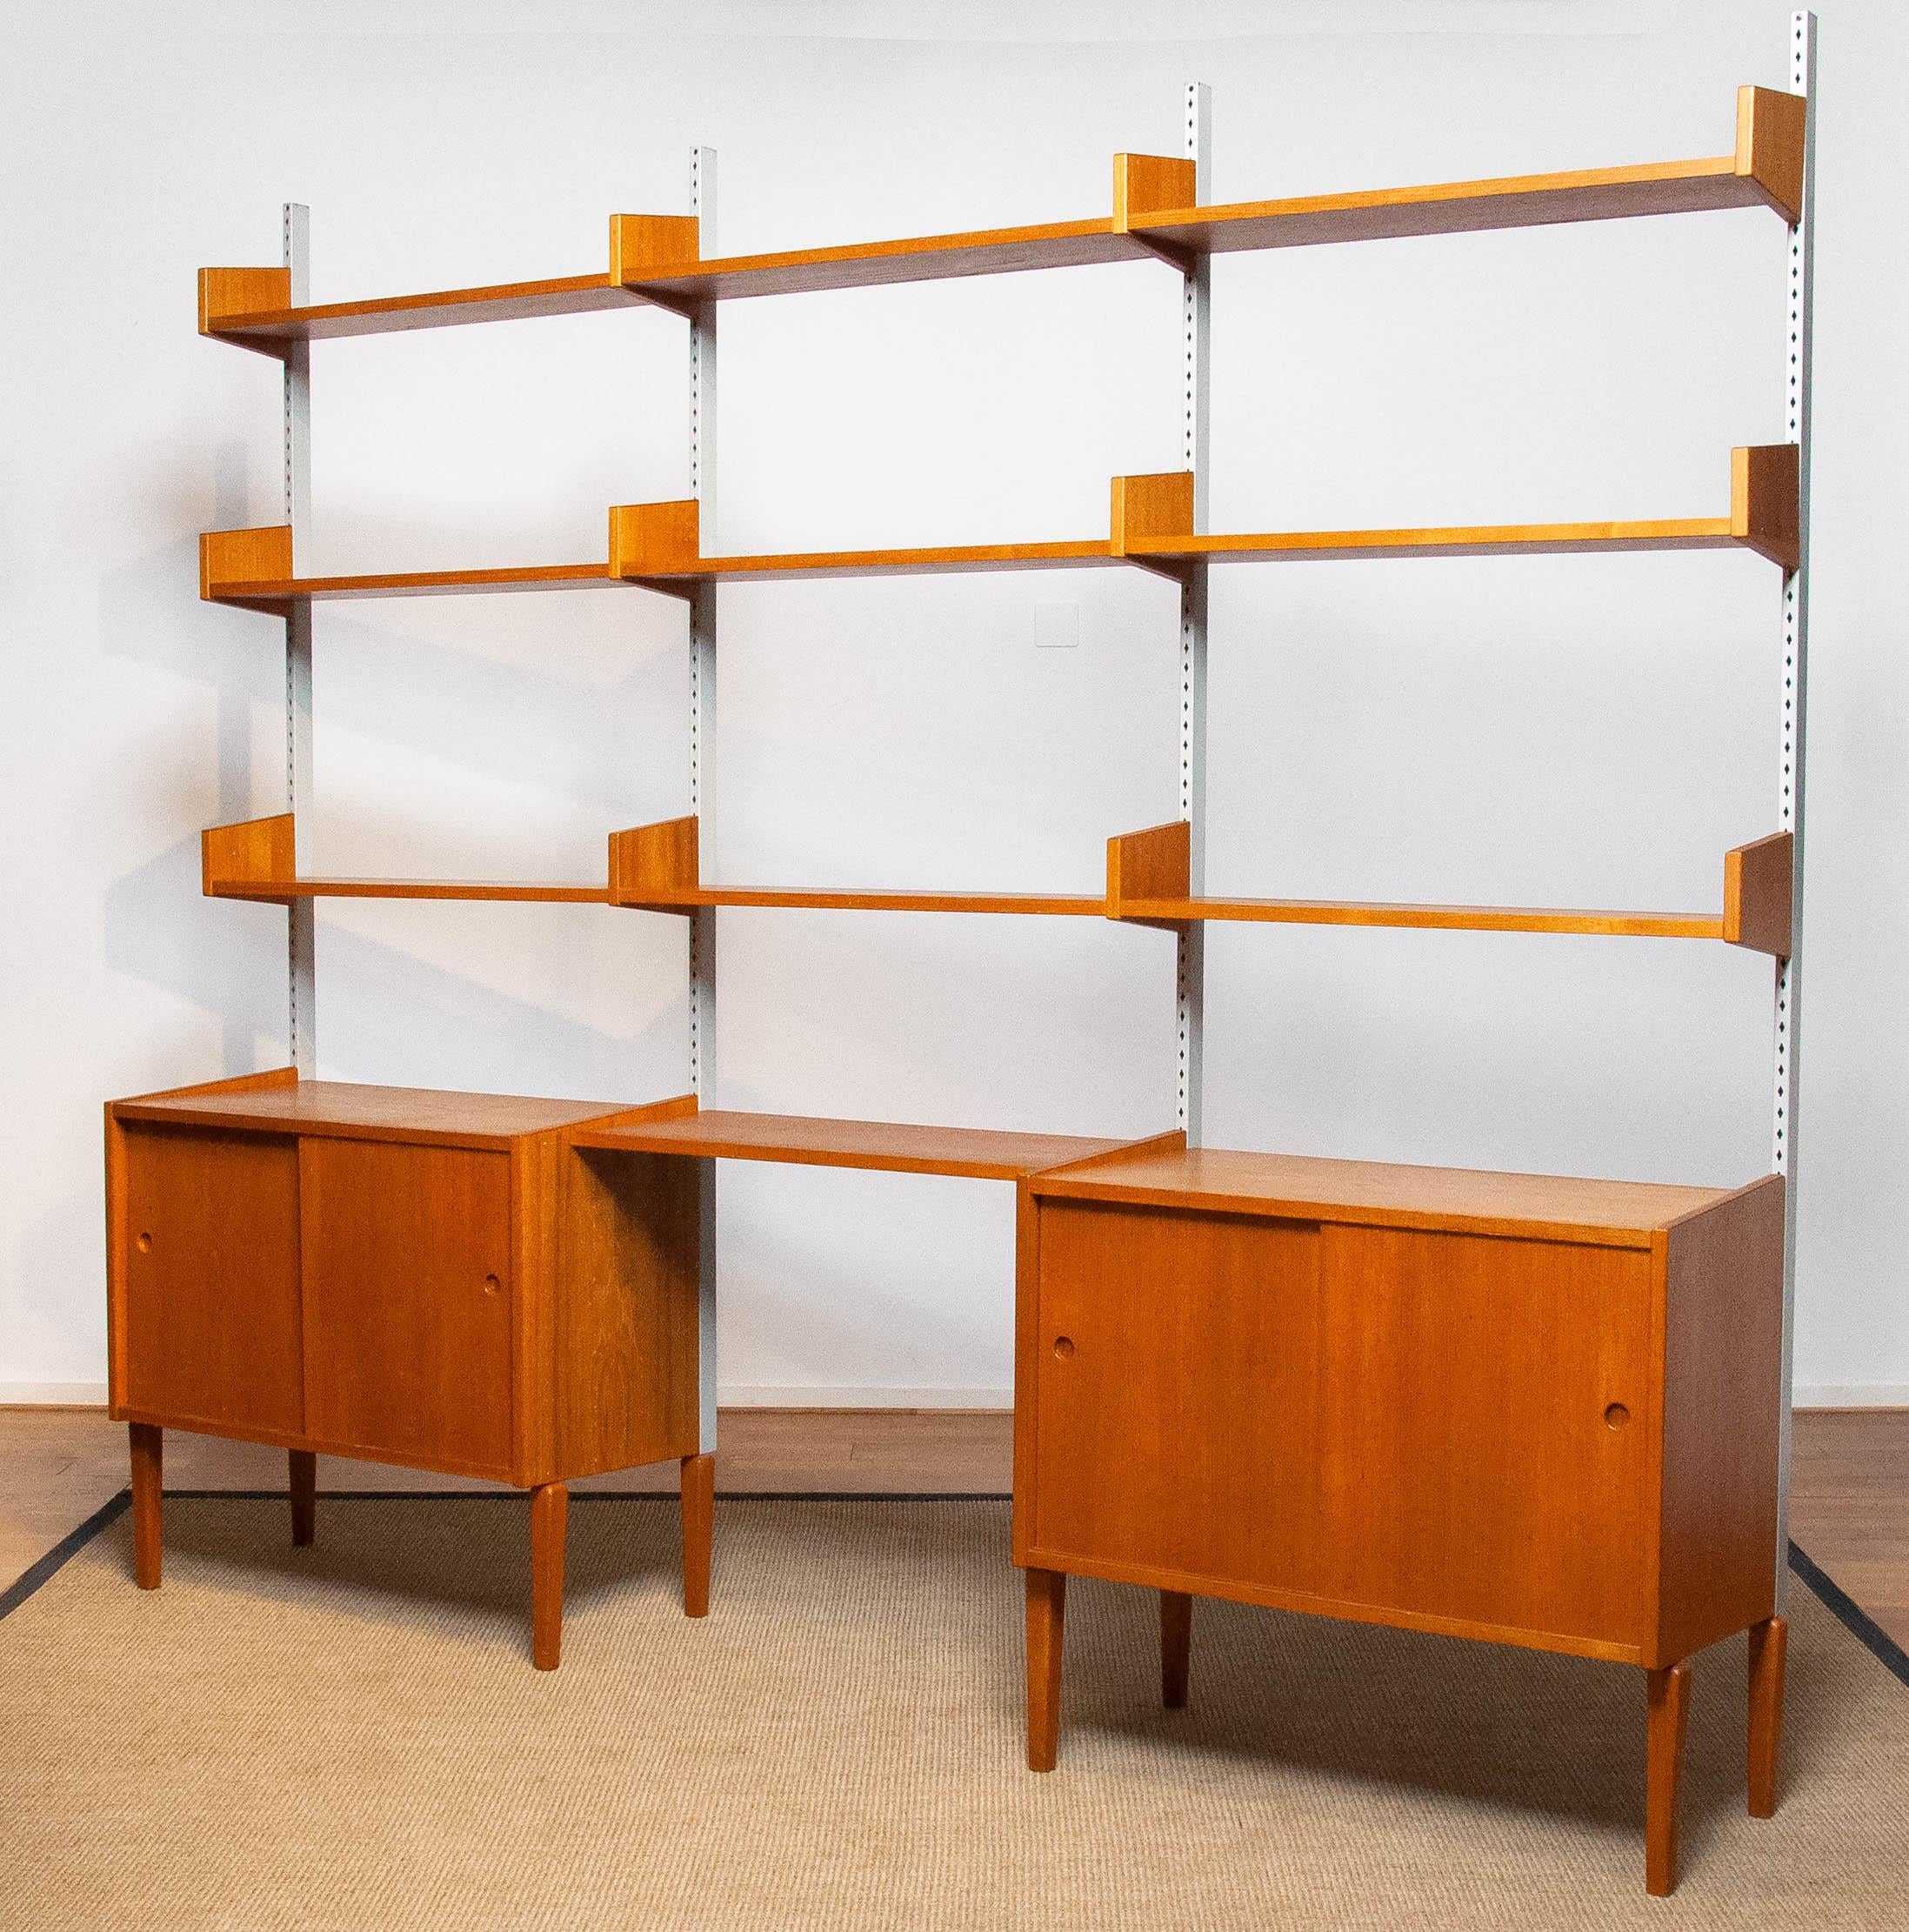 Beautiful and extremely rare modulair shelf system designed by Harald Lundqvist for Lizzy Element Möbel Sweden from the 1950's. The top-shelfs are adjustable in hight. The cabinets both have two sliding doors and also an adjustable shelf inside. The